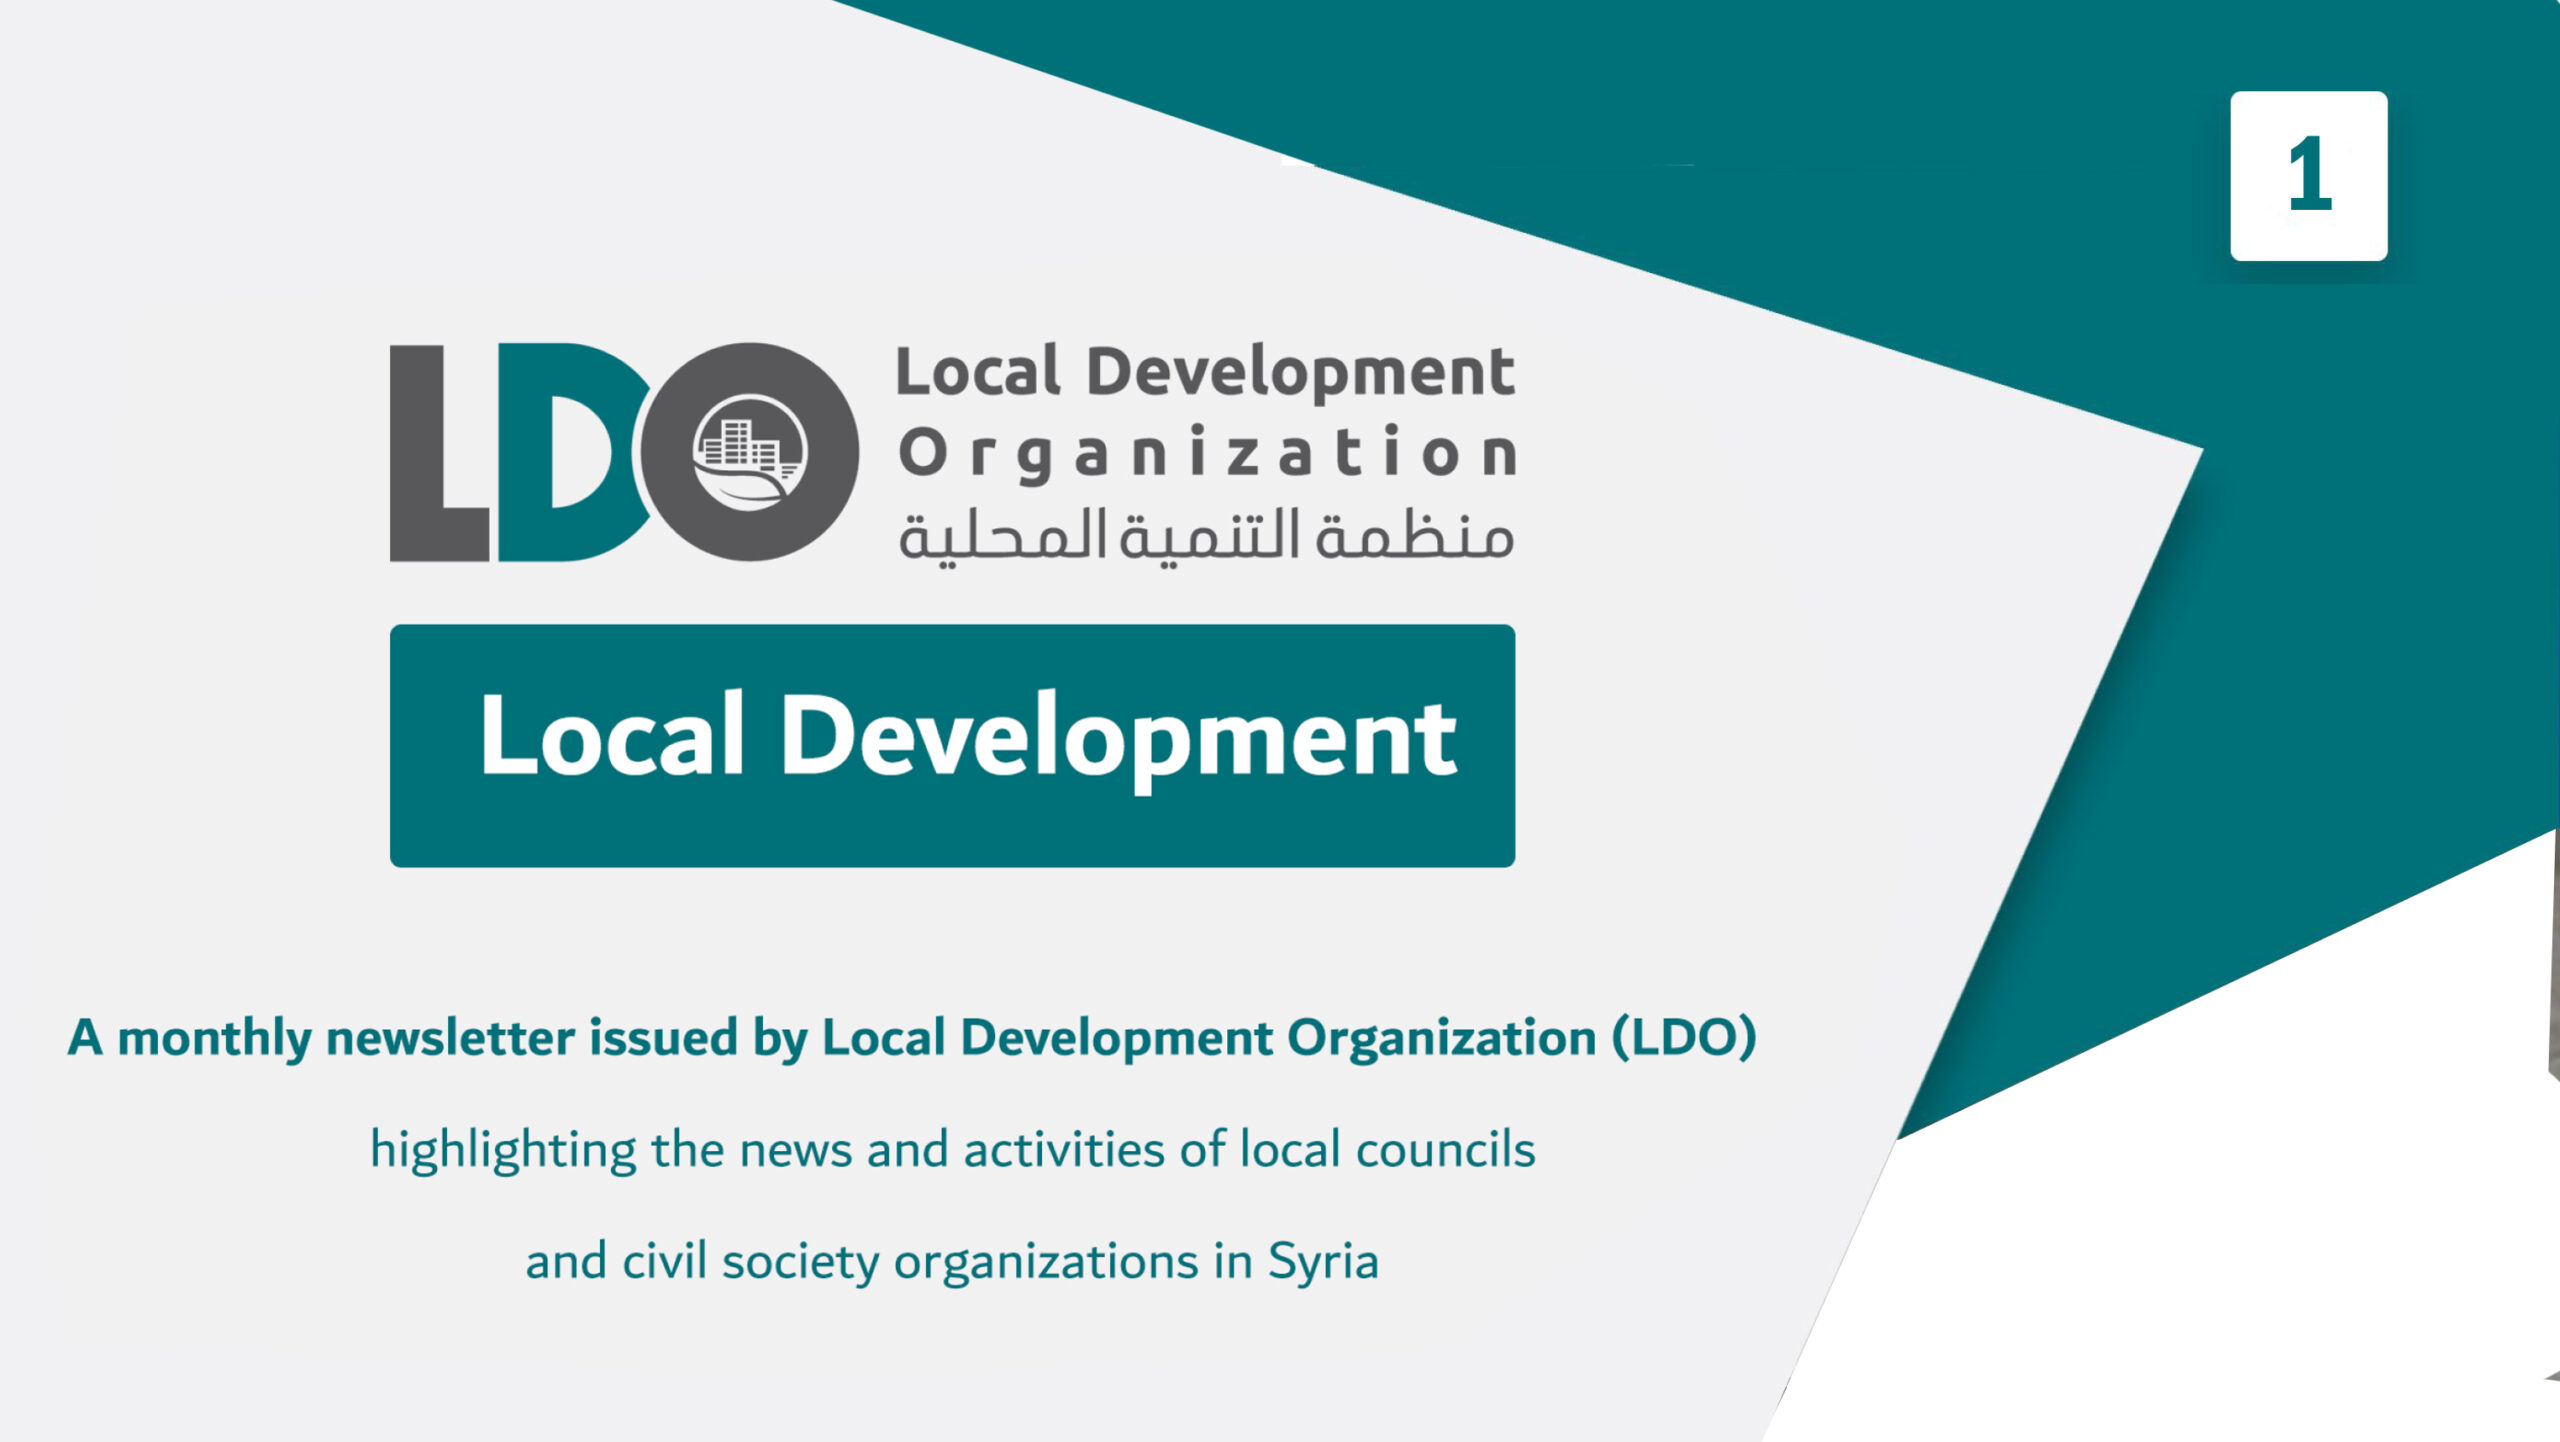 The First issue – Local Development